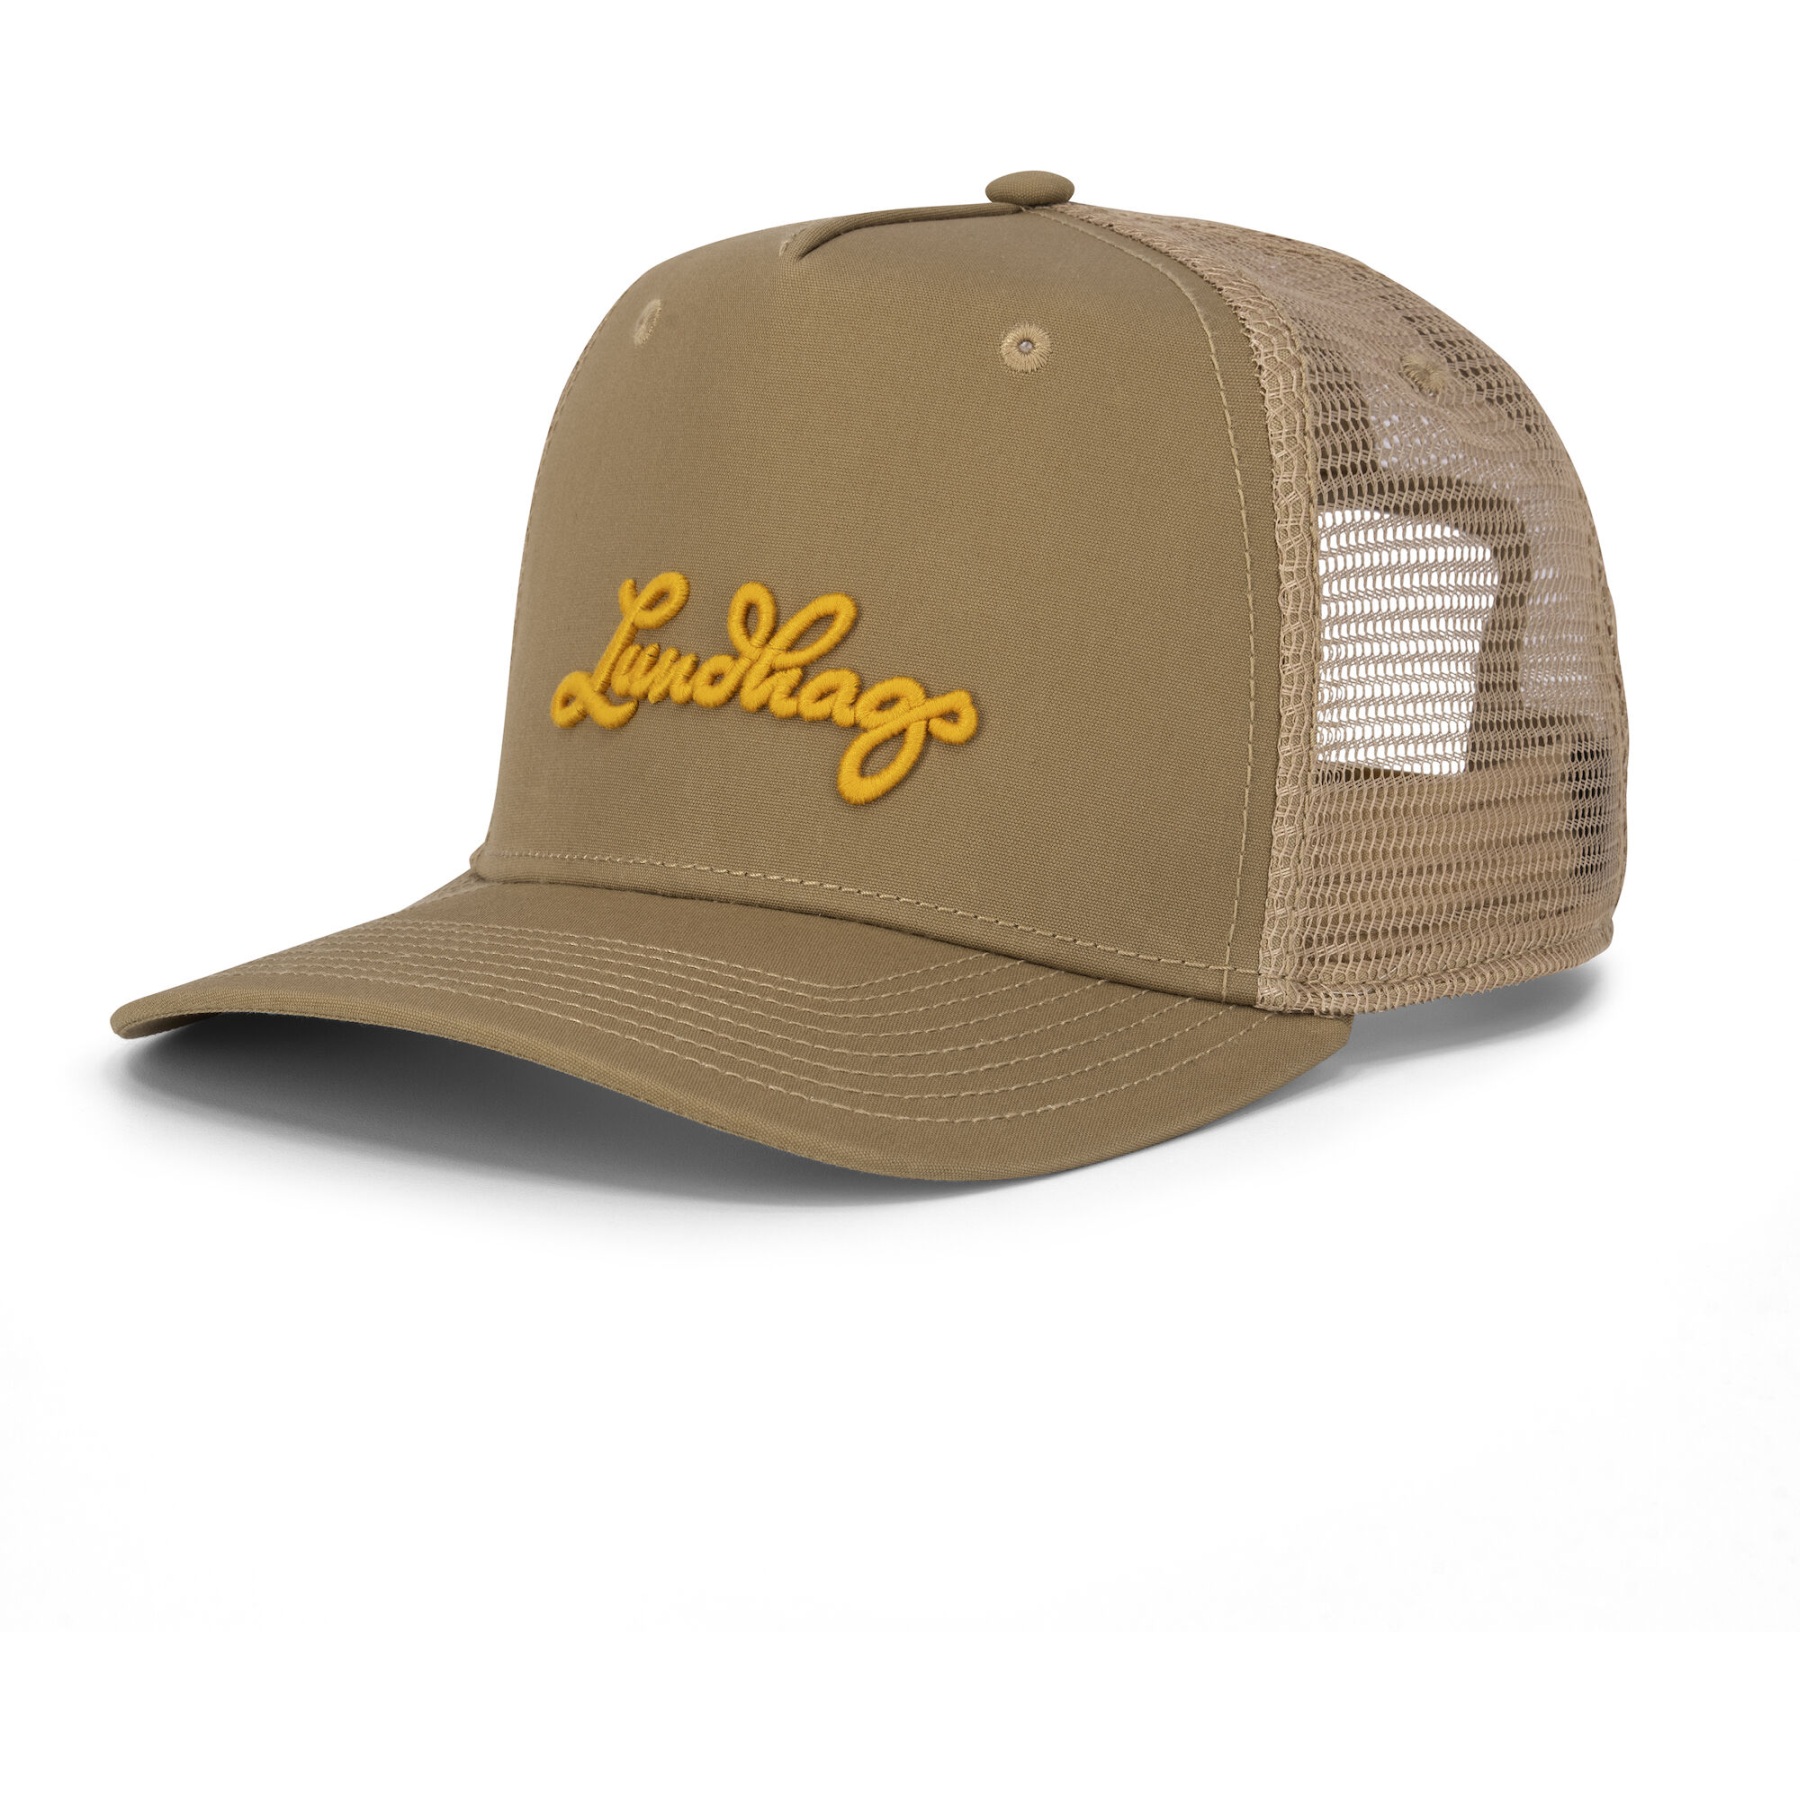 Picture of Lundhags Trucker Cap - Dk Sand 02200